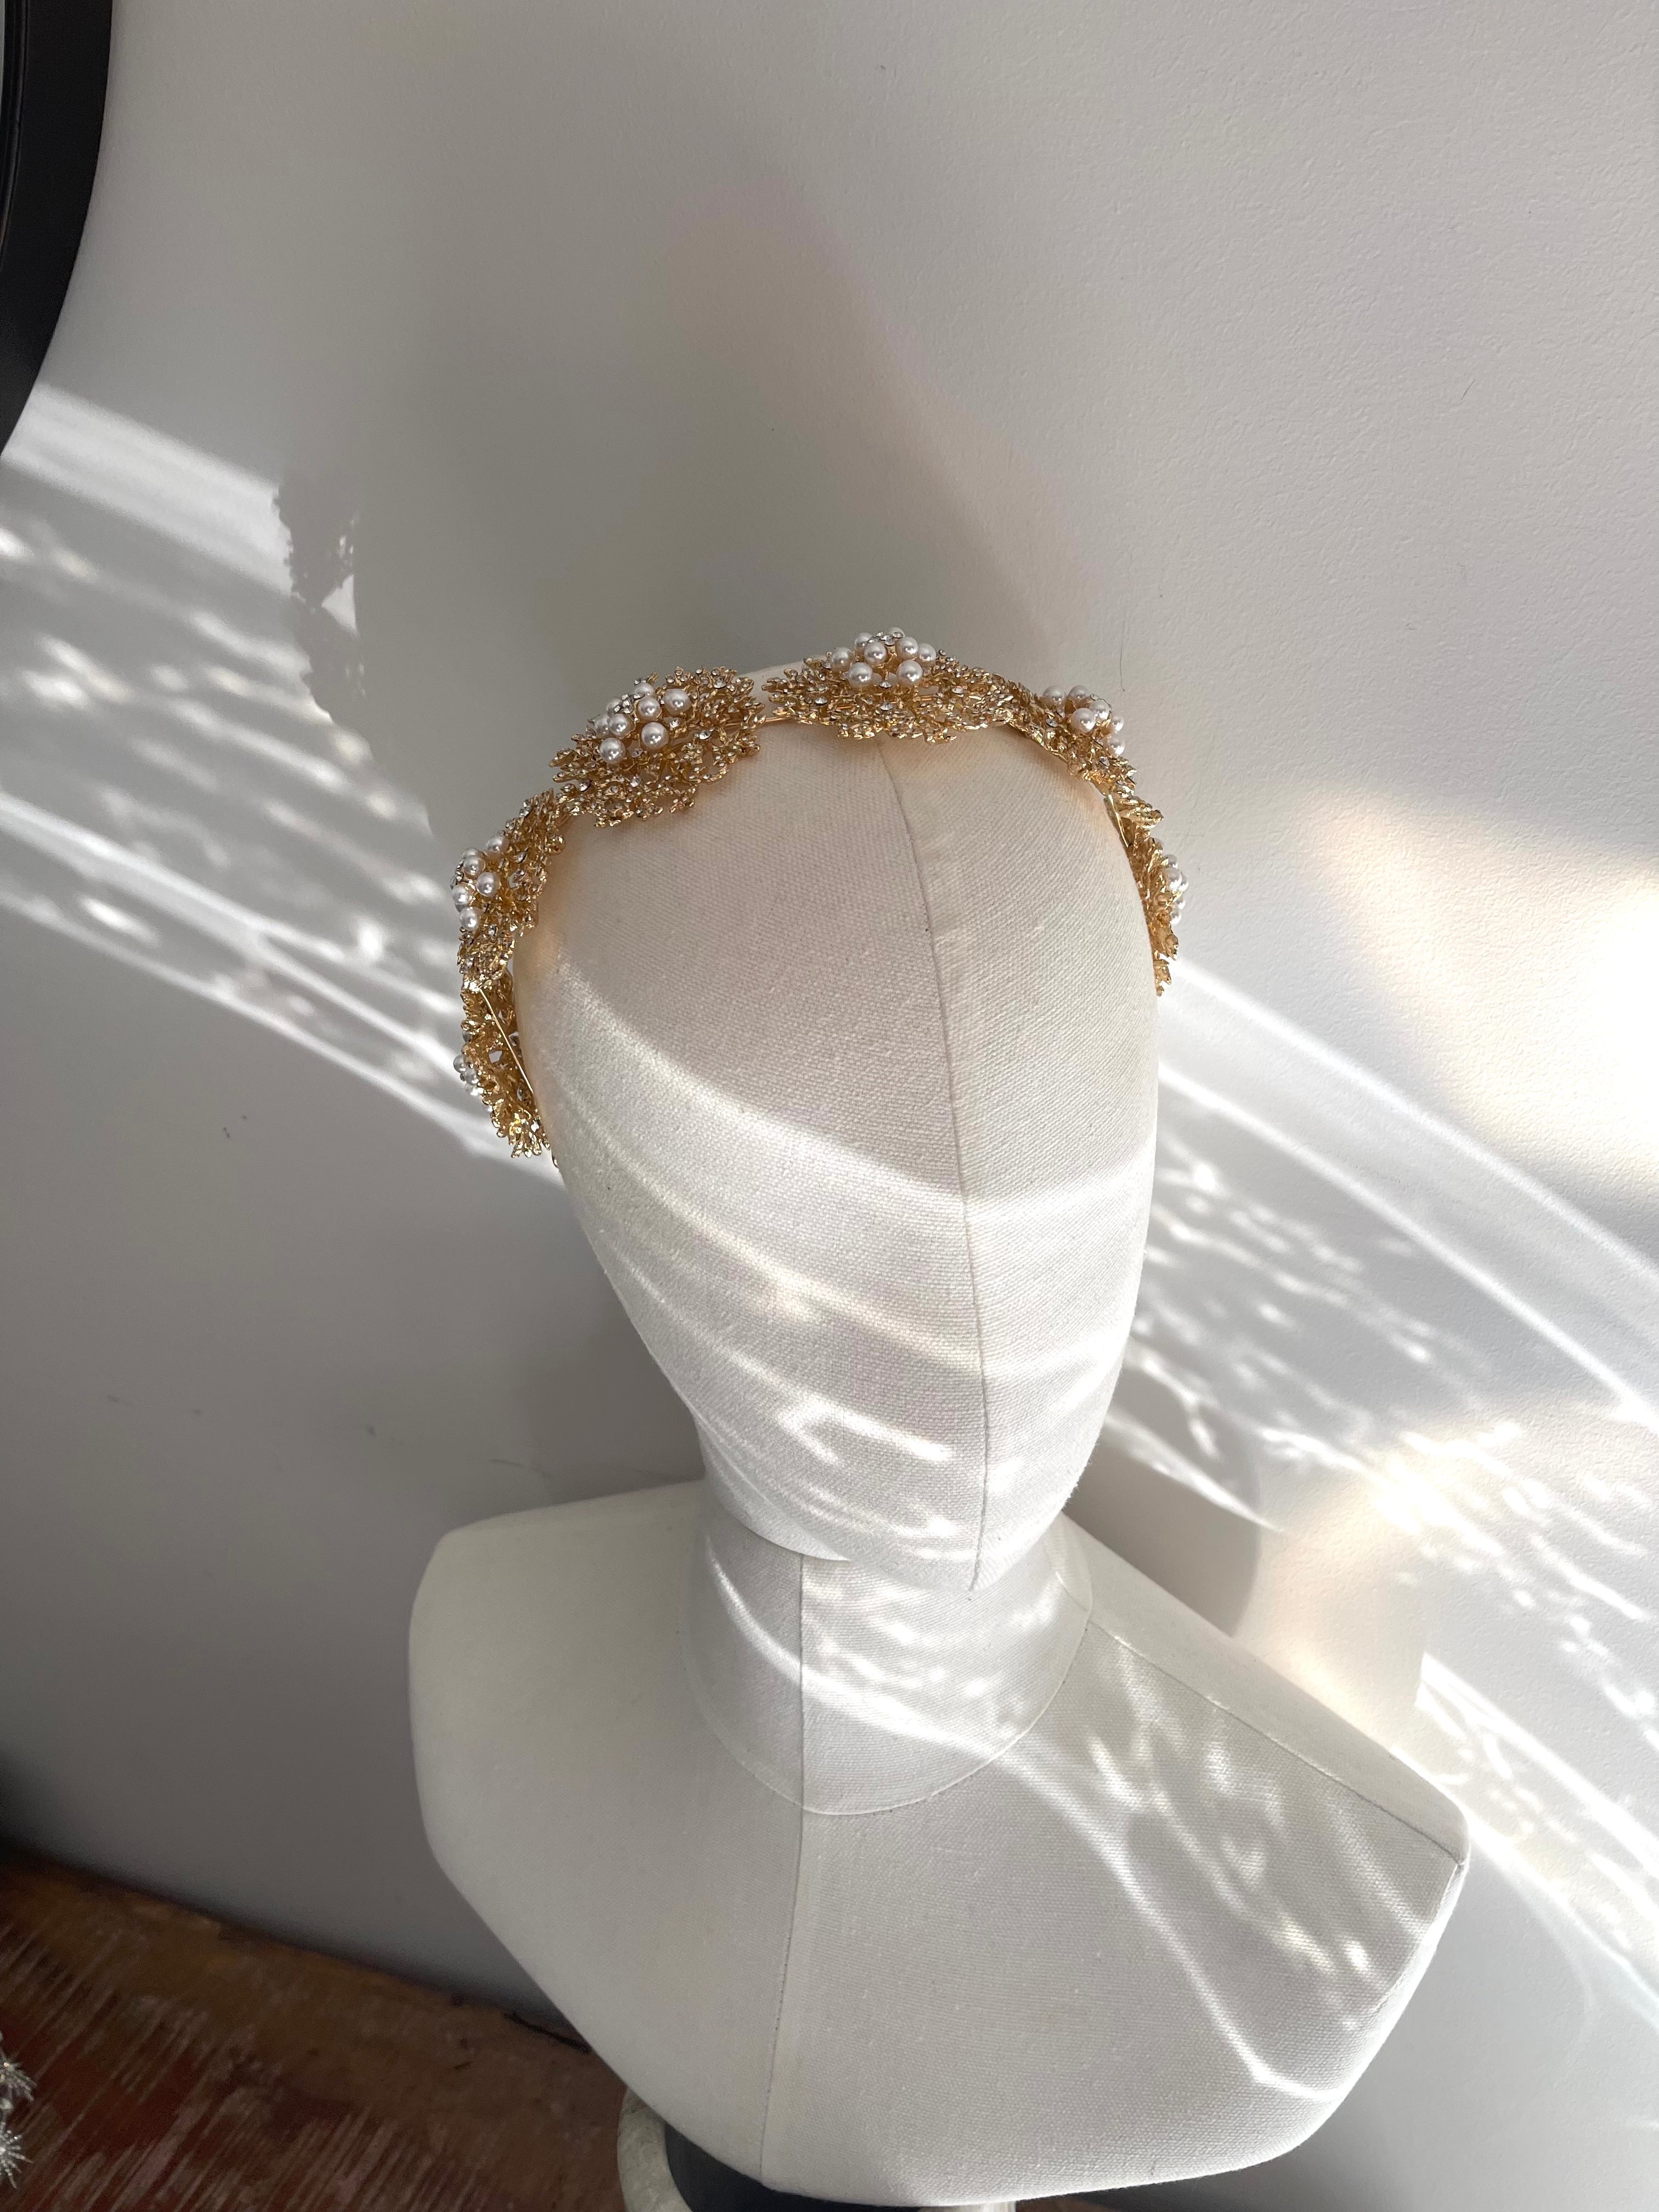 Vintage Gold and Pearl Headband in Coral Cluster Design, Bridal Wedding Crown or Boho Headband in Gold ~ BOTANY